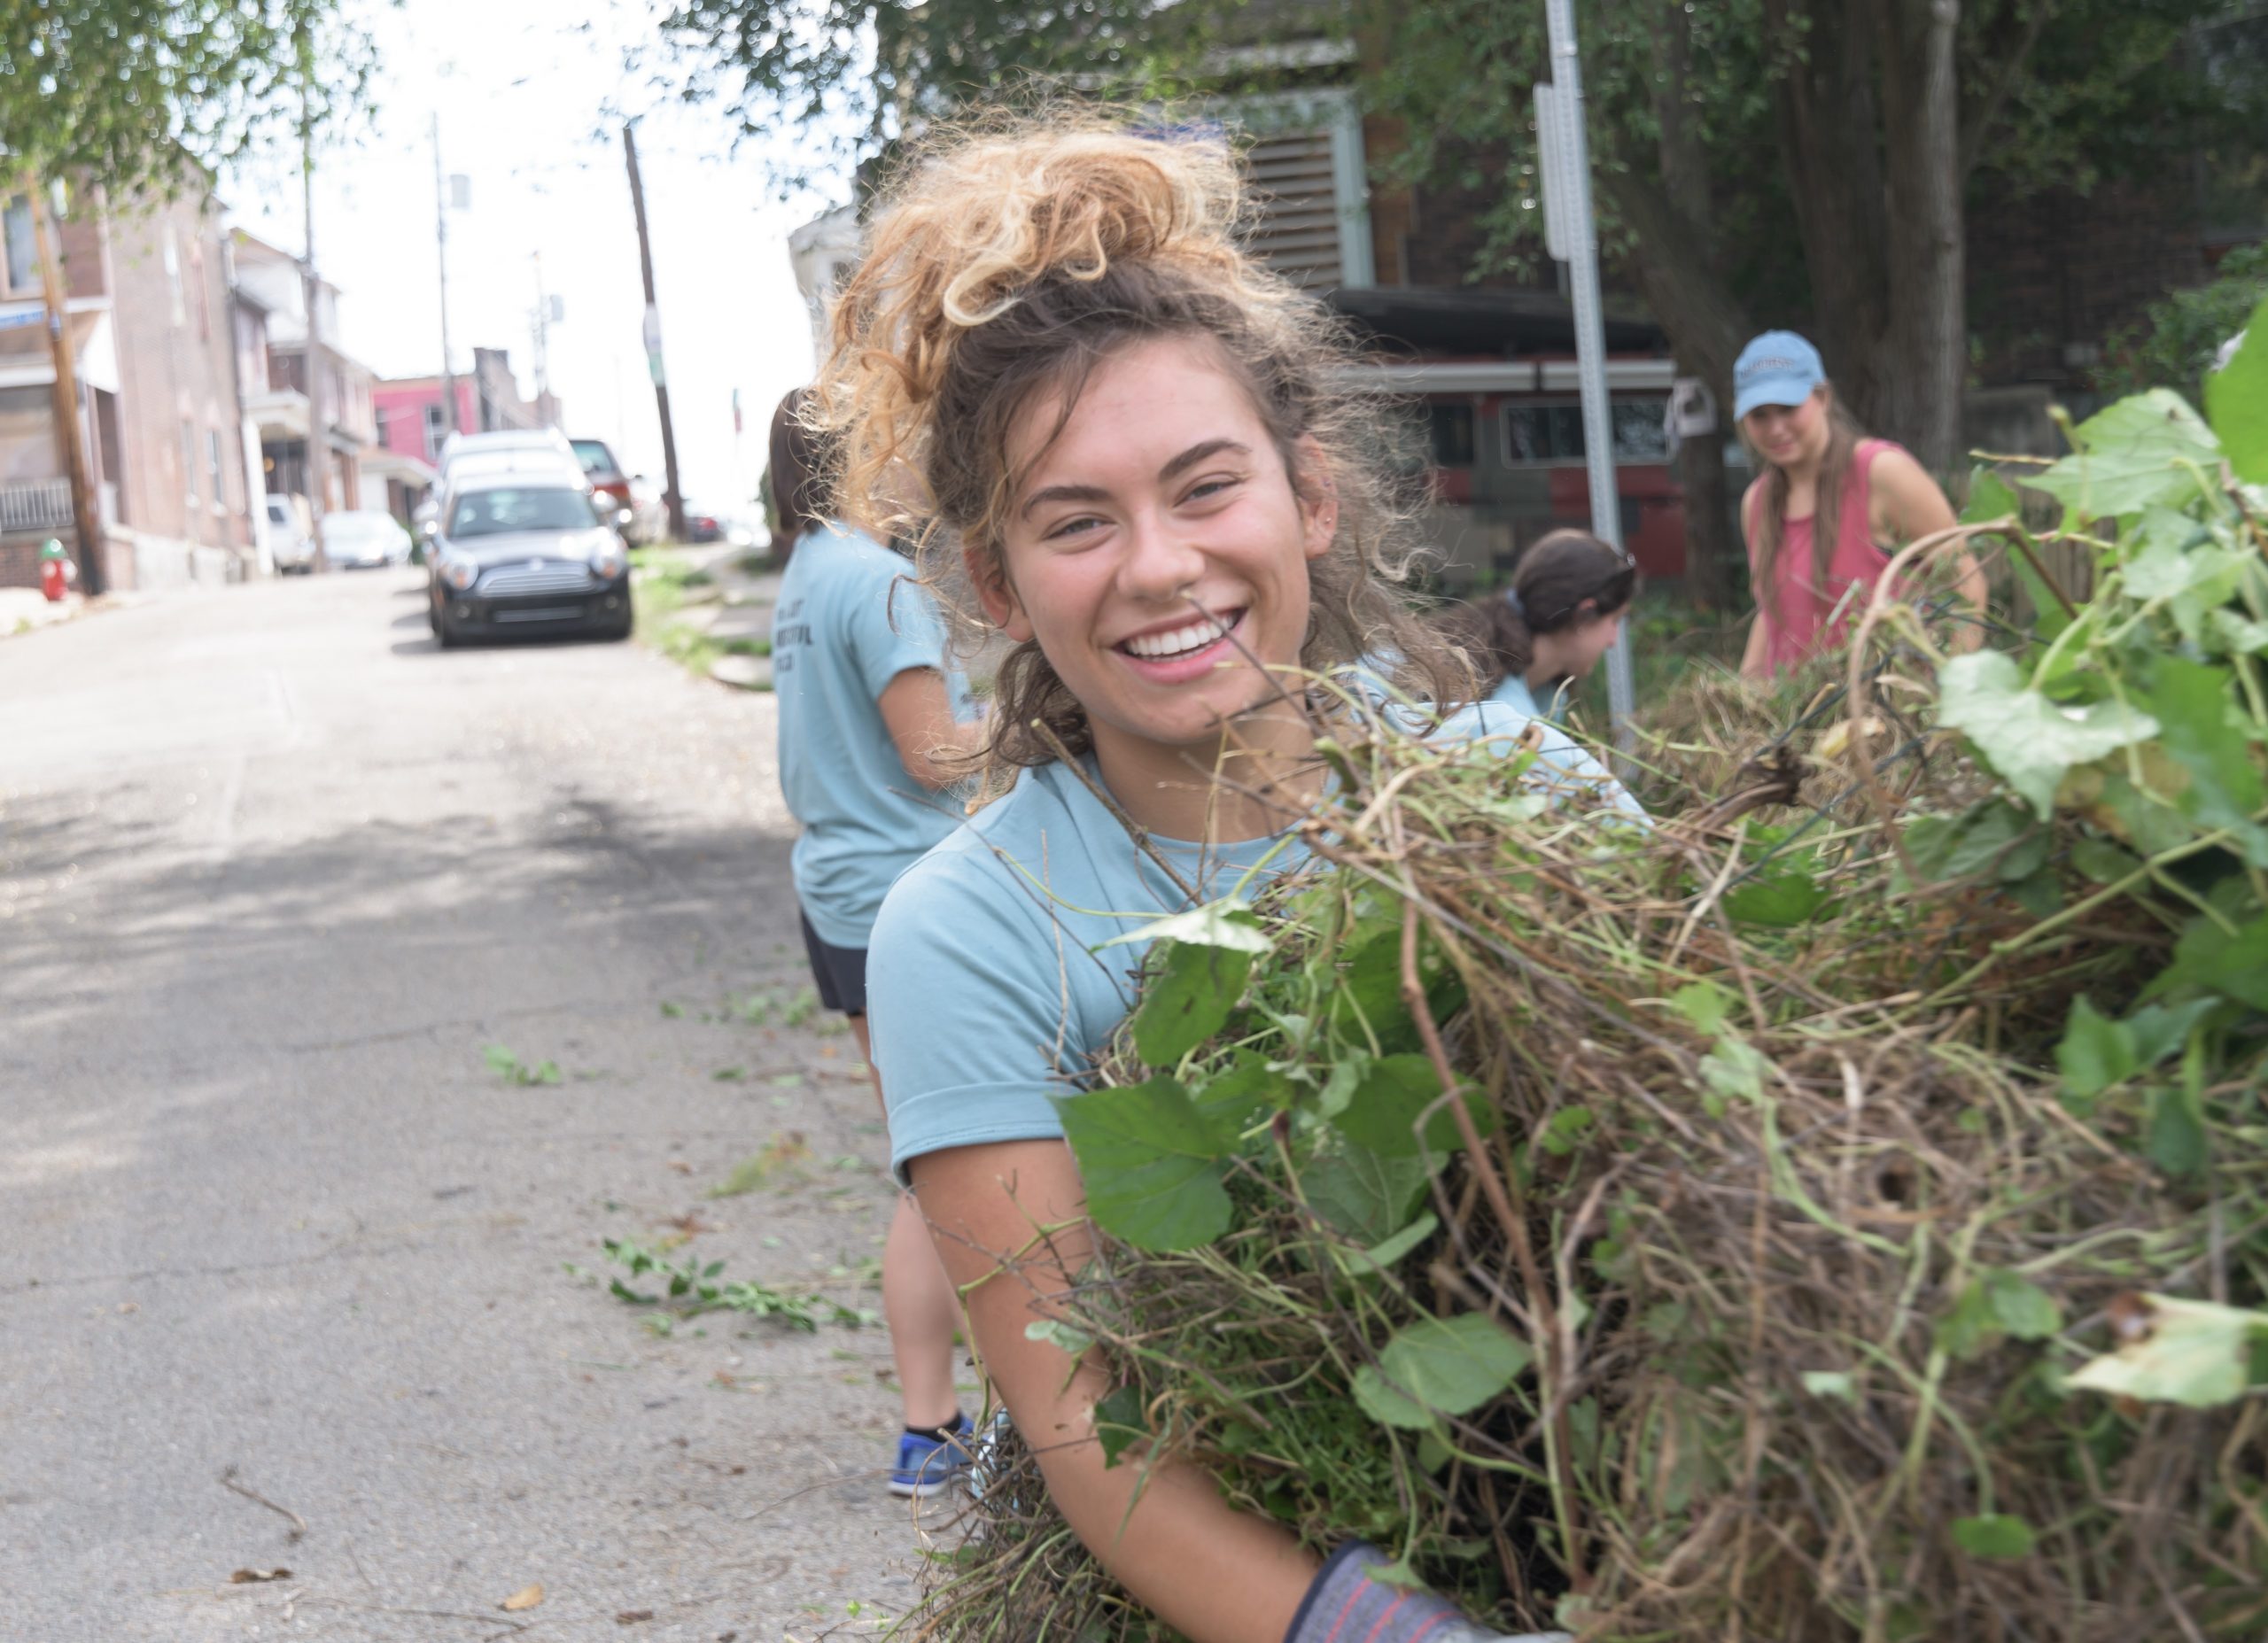 A University of Detroit Mercy student helps clean up in a local neighborhood. Just one of the many ways you can #MakeMercyReal!